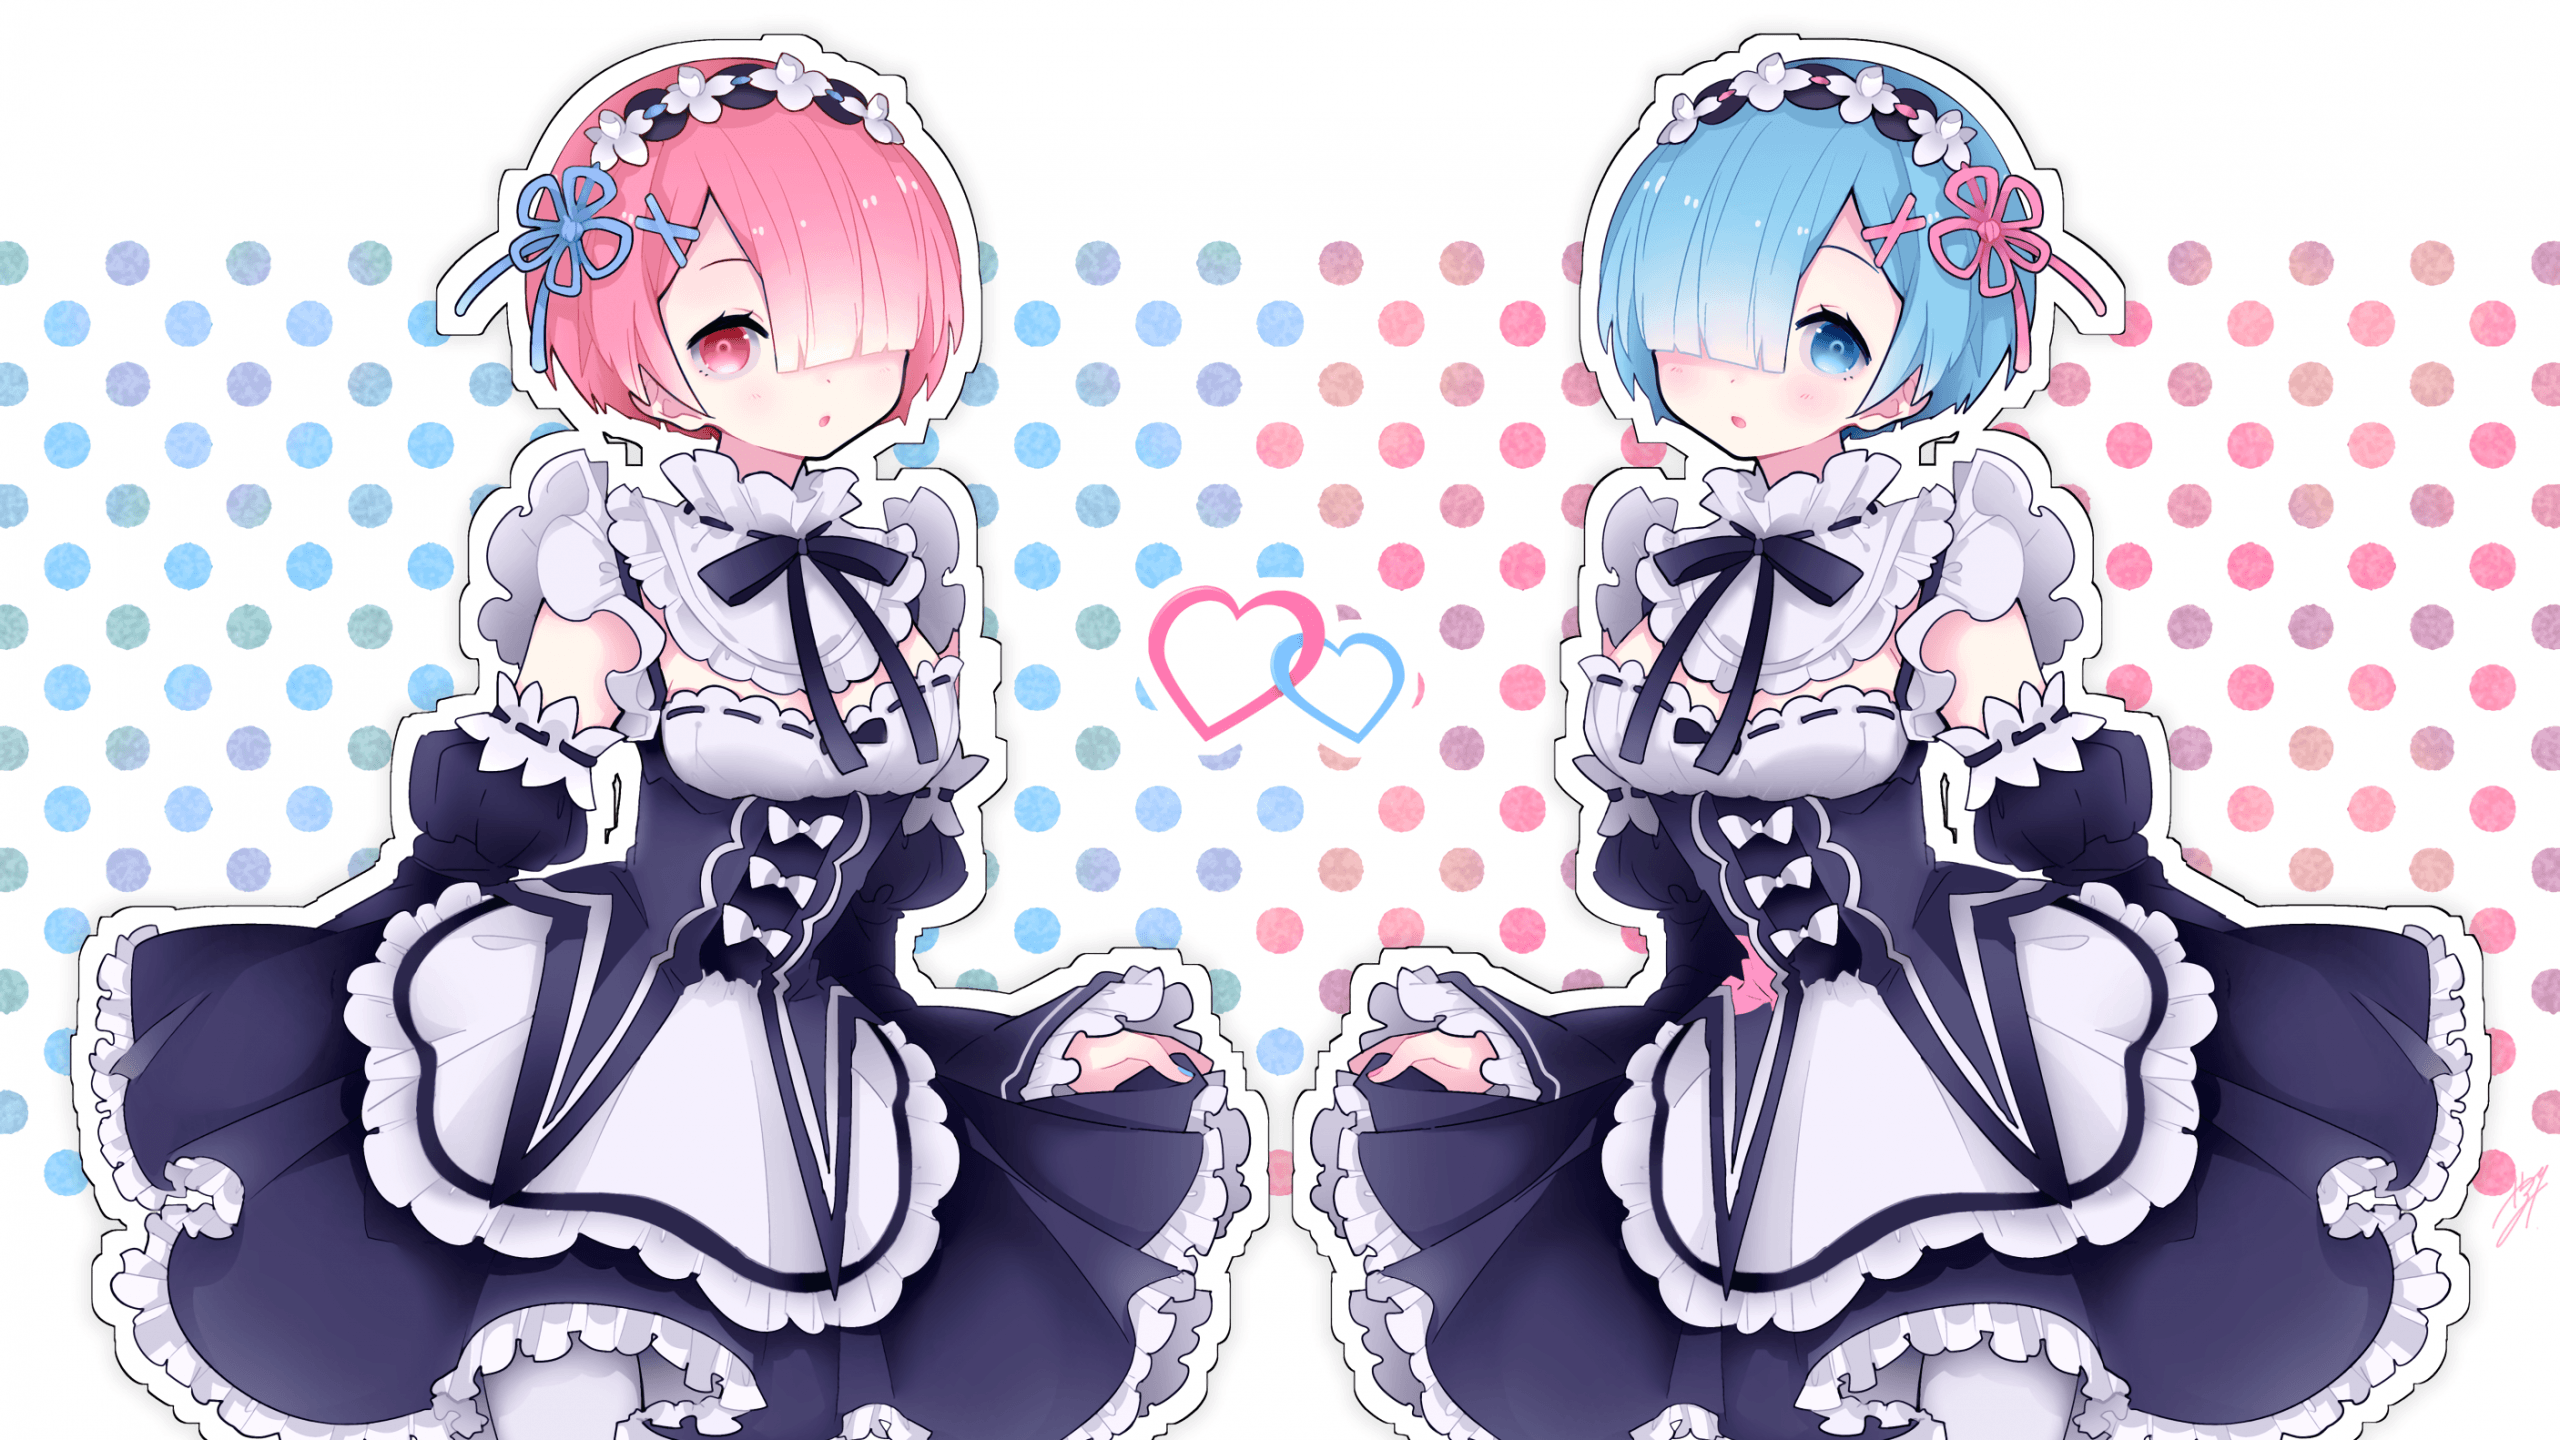 Download wallpaper 950x1534 rem and ram, anime girls, minimal, iphone,  950x1534 hd background, 5743